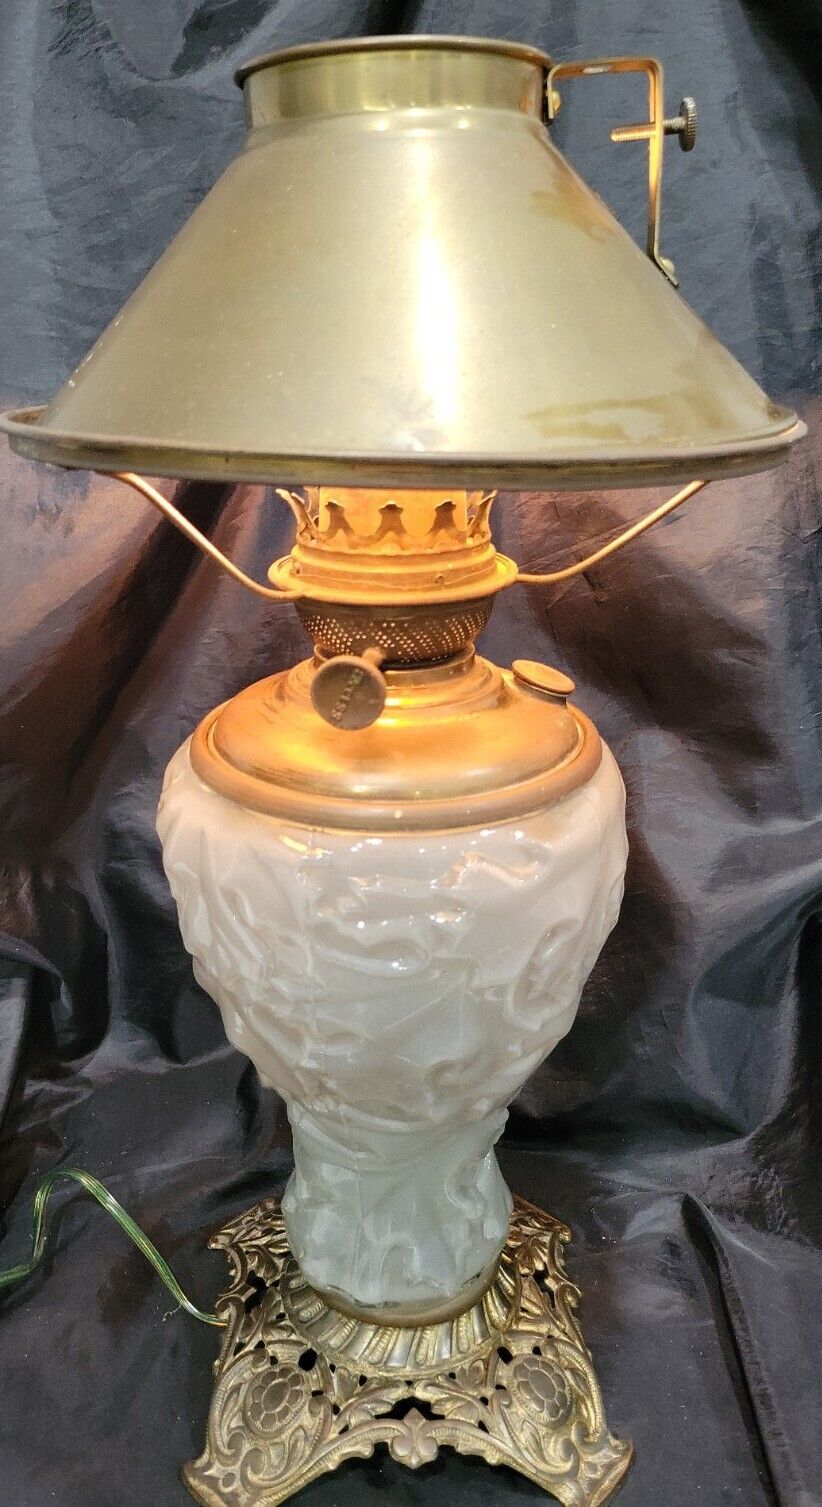 ANTIQUE SUCCESS OIL LAMP W/SATIN PUFFY ROSE GLASS GWTW CONVERTED W/BRASS SHADE